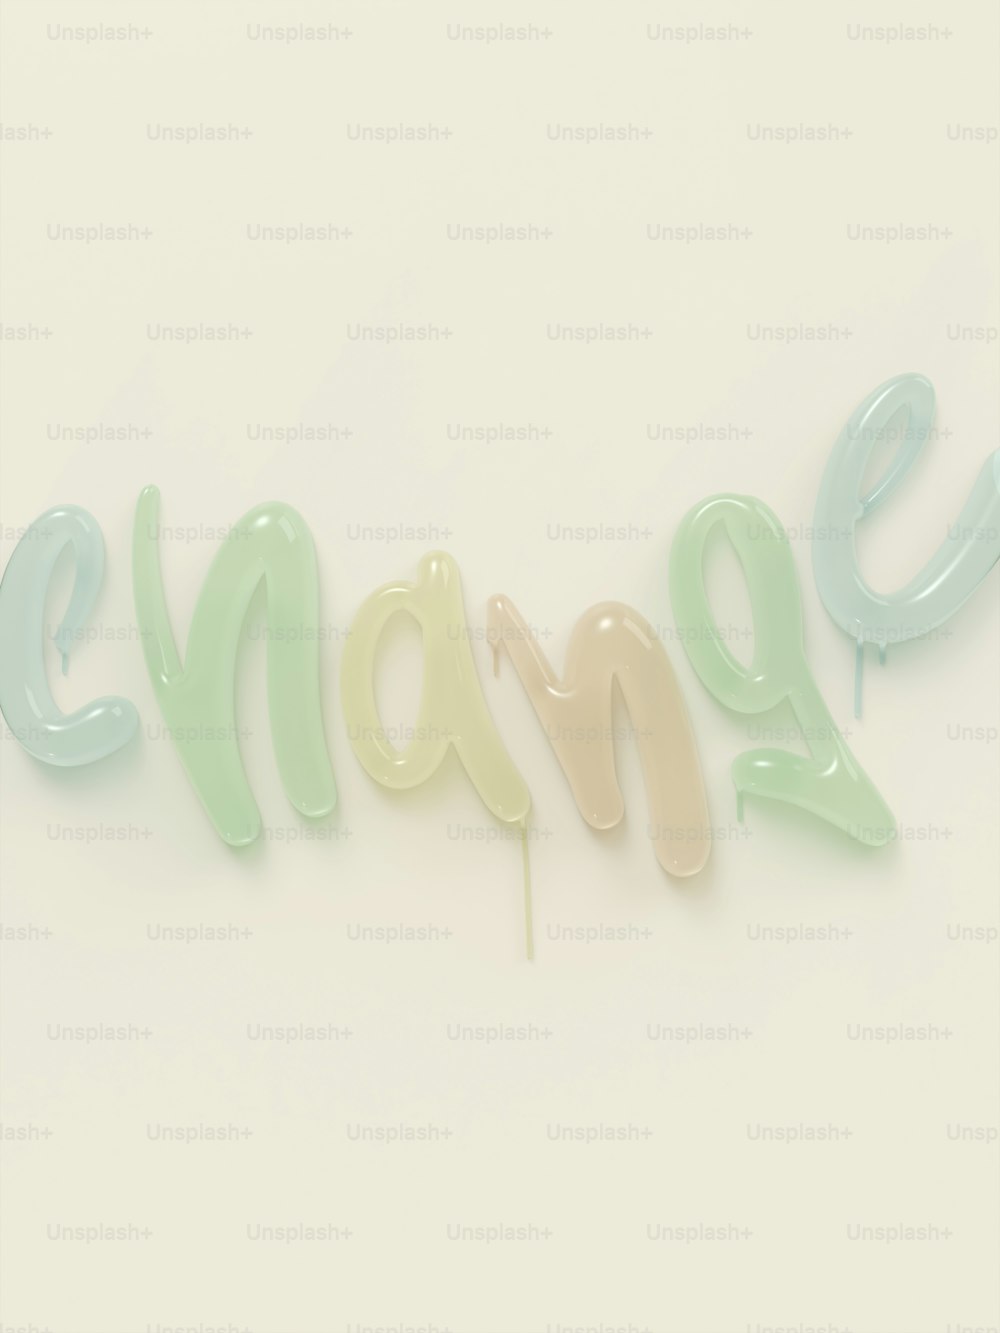 a word made out of balloons that spell out the word imagine